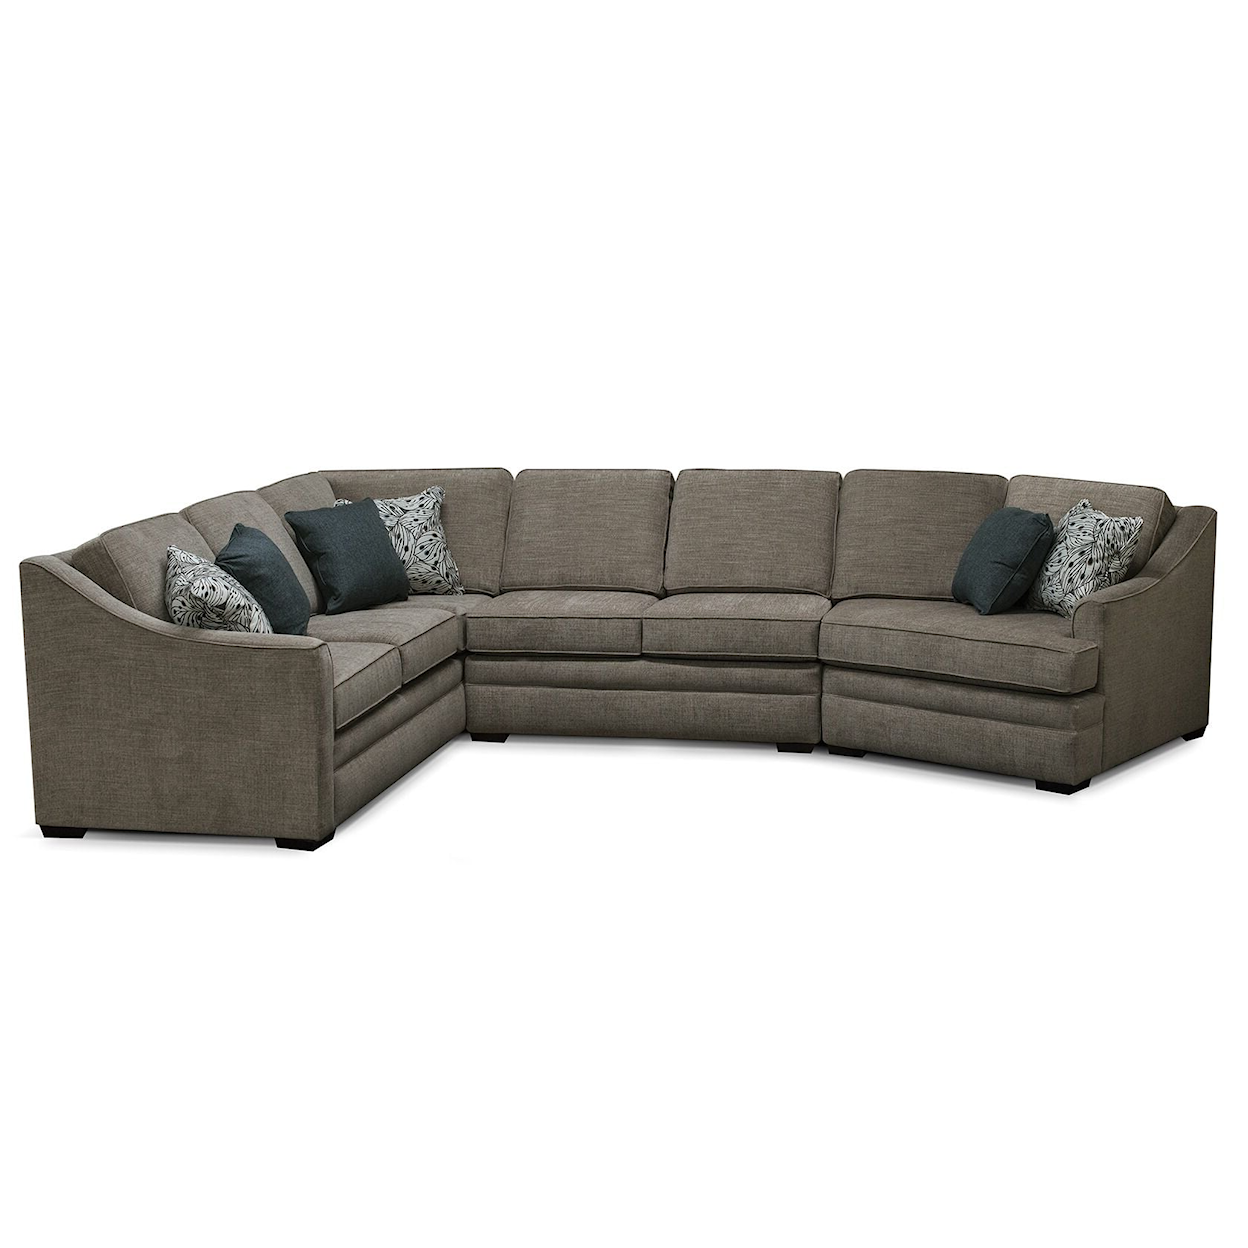 England 4T00 Series 3-Piece Sectional Sofa